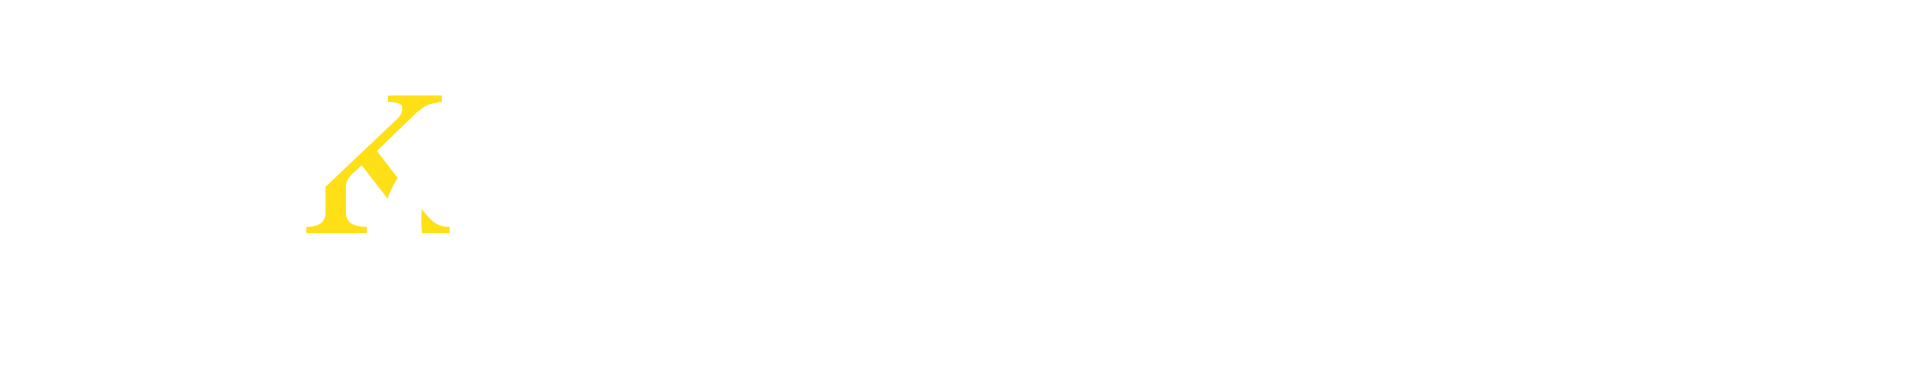 together and ready text graphic